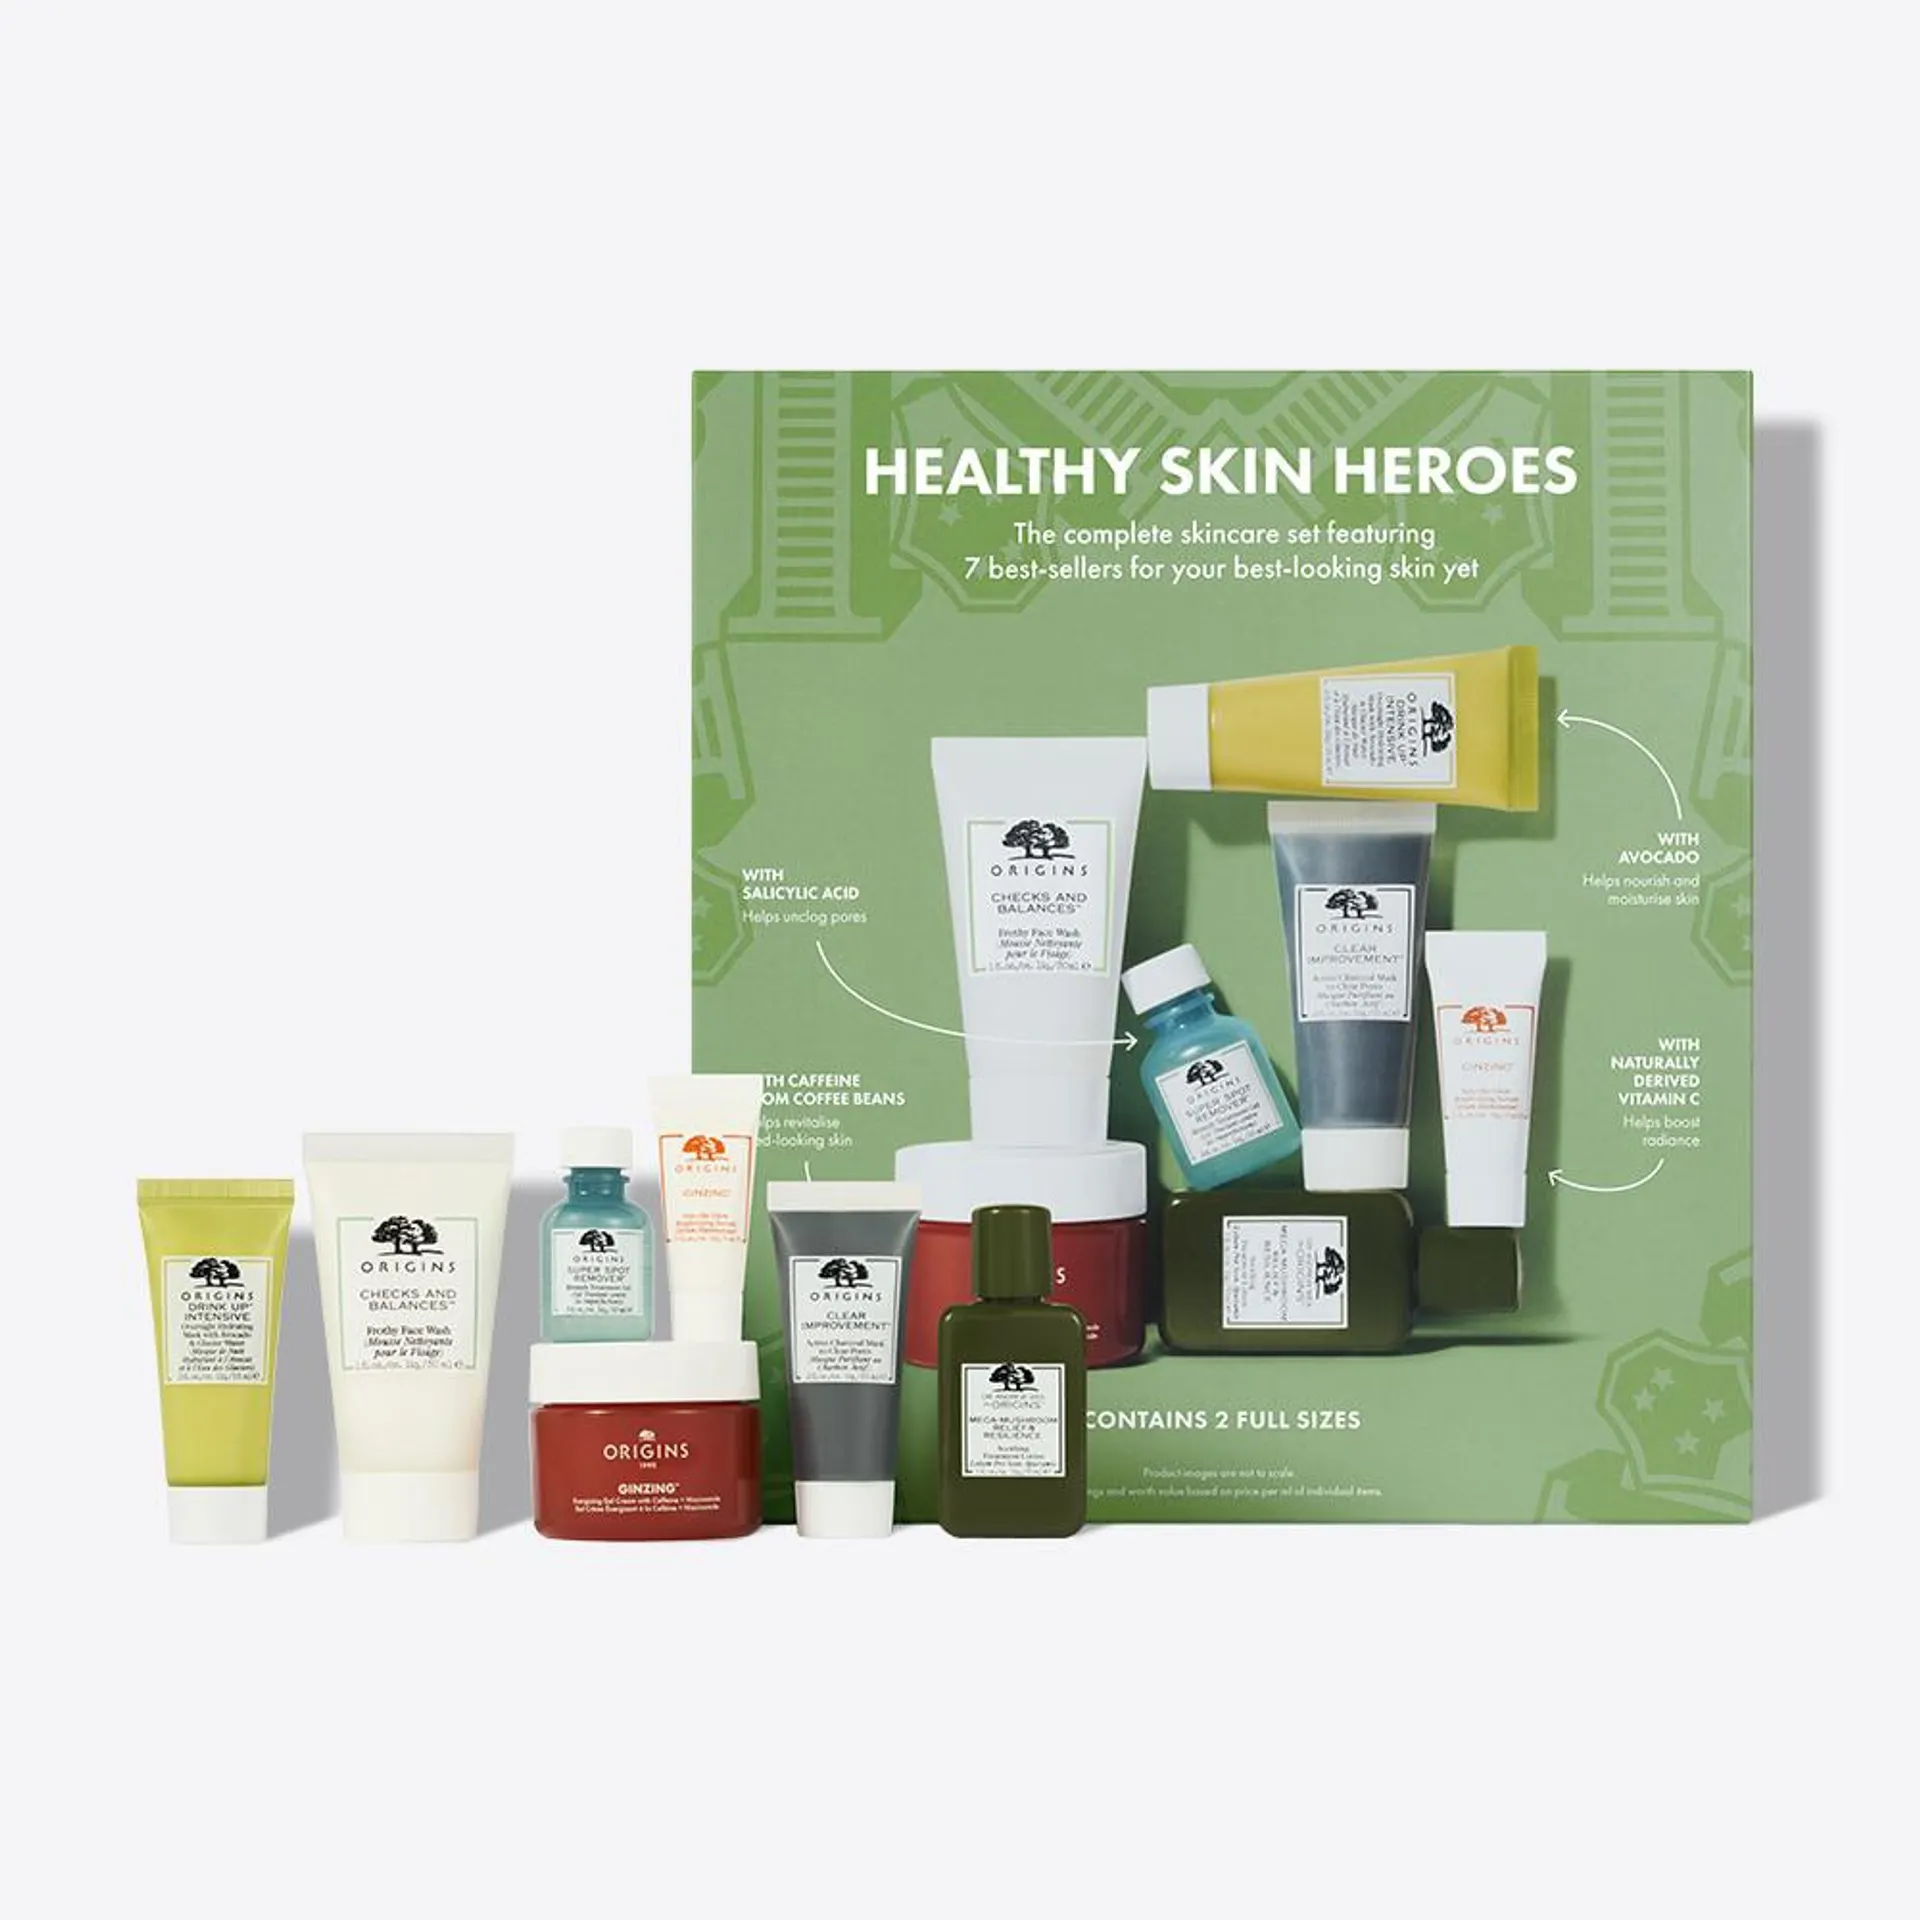 COMPLETE SKINCARE ROUTINE GIFT SET The Complete Skincare Set Featuring 7 Best-Sellers For Your Best-Looking Skin Yet. Worth £61